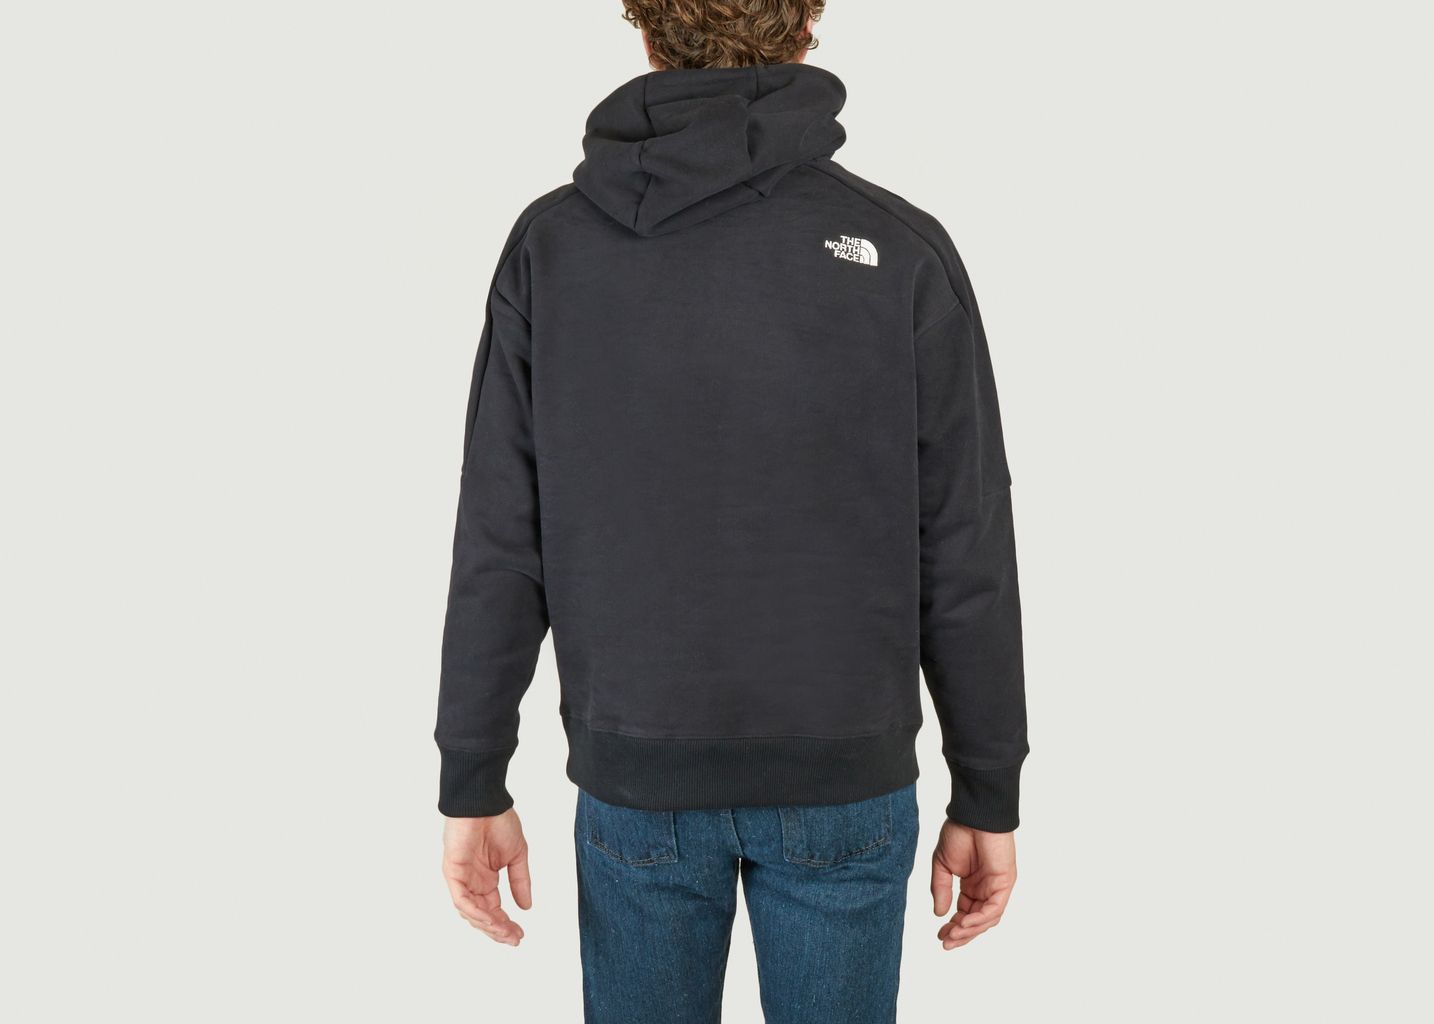 Hoodie The 489 - The North Face